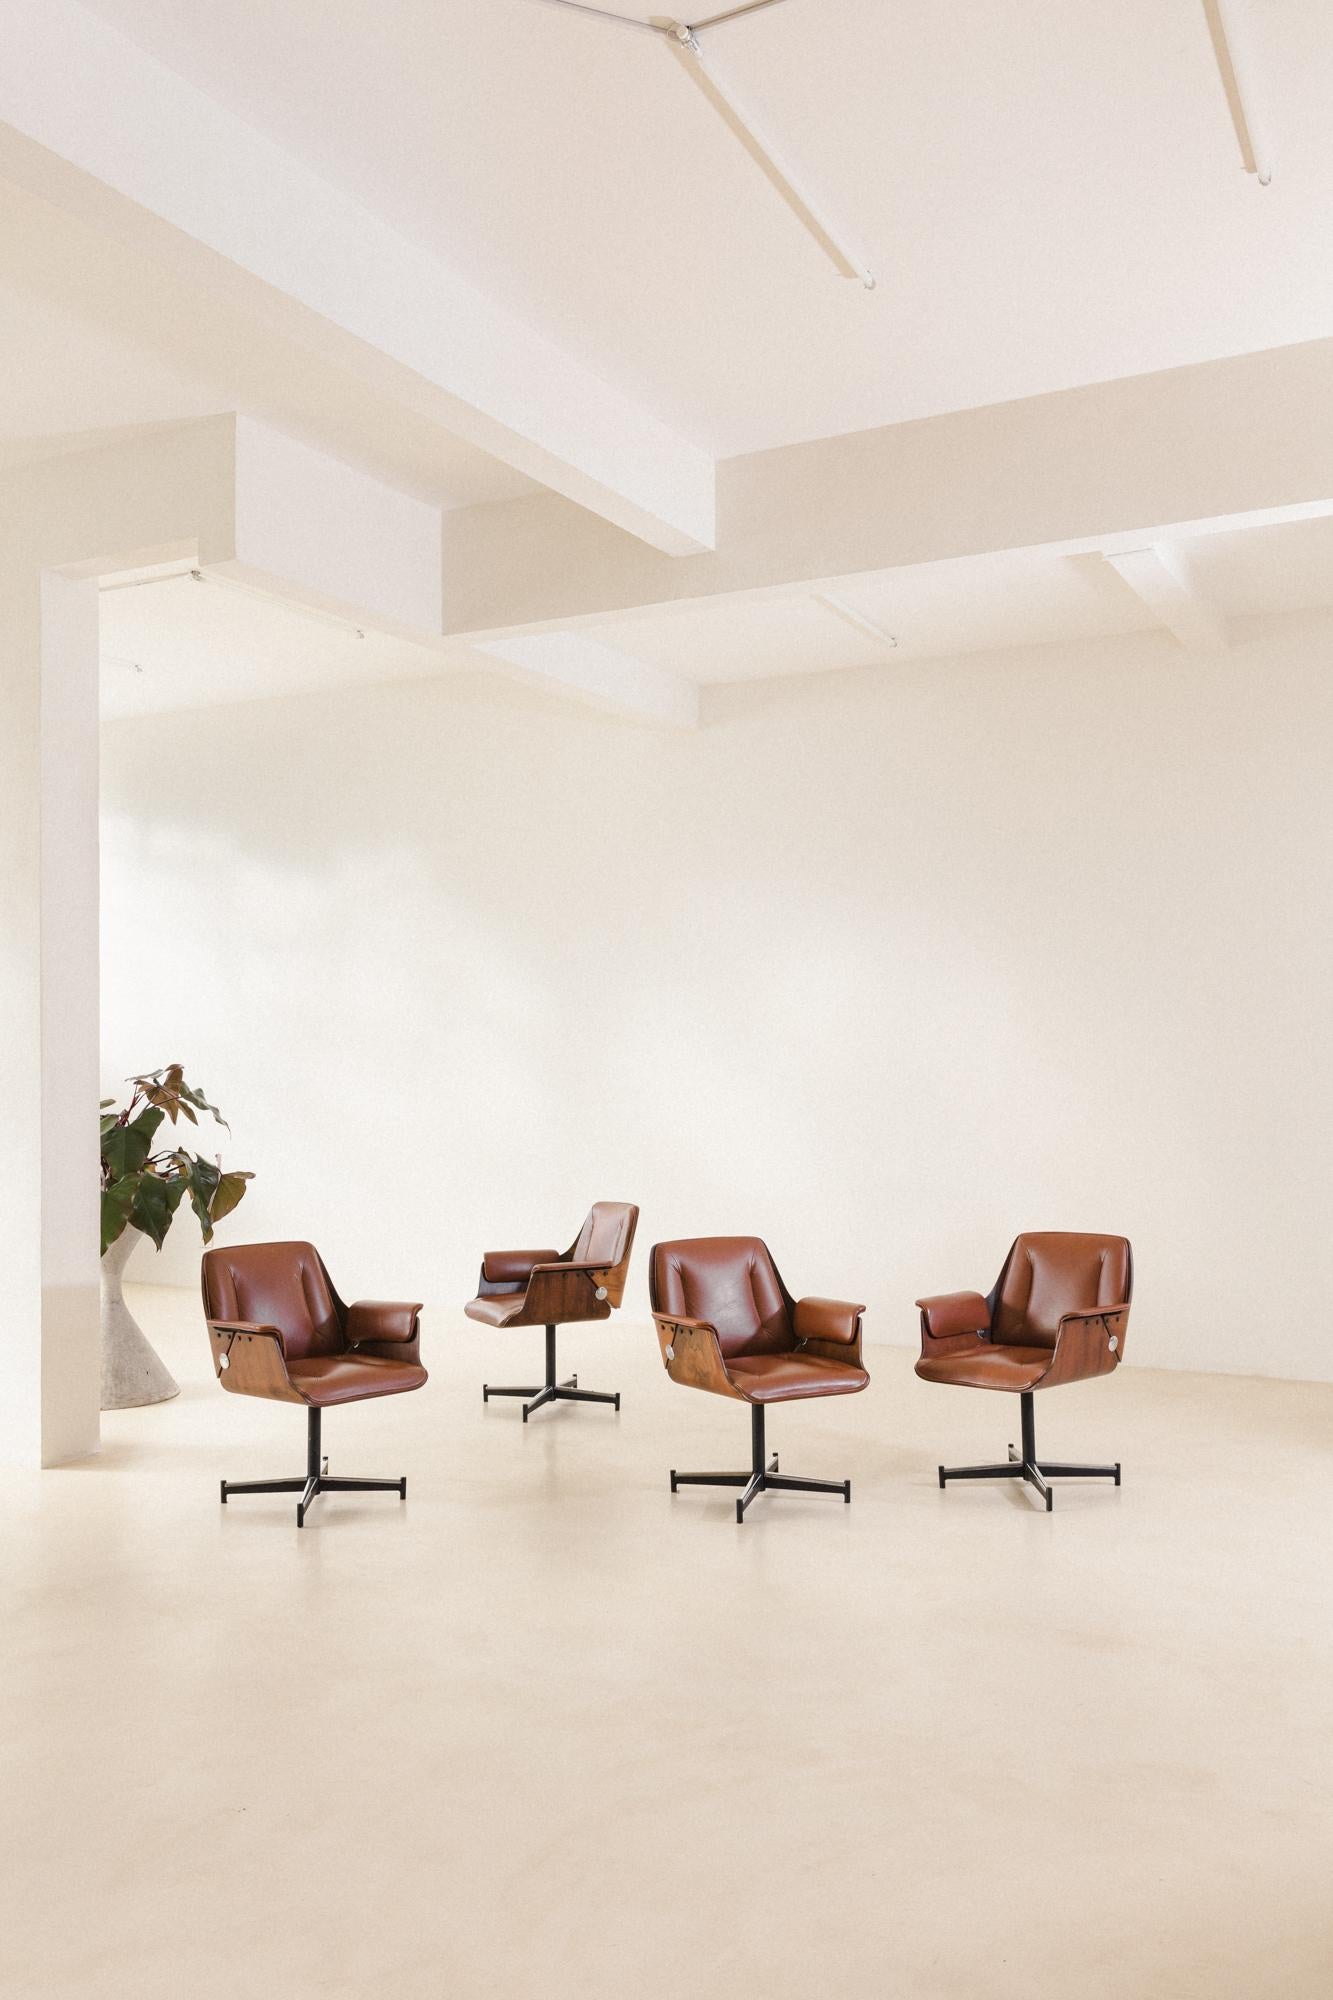 Single Dinamarquesa chair, designed by Italian-born architect Carlo Fongaro (1915-1986) and produced by Probjeto, who signed one of the most popular lines of modern Brazilian furniture in the 1970s. 

The chairs’ structure is composed of seats and